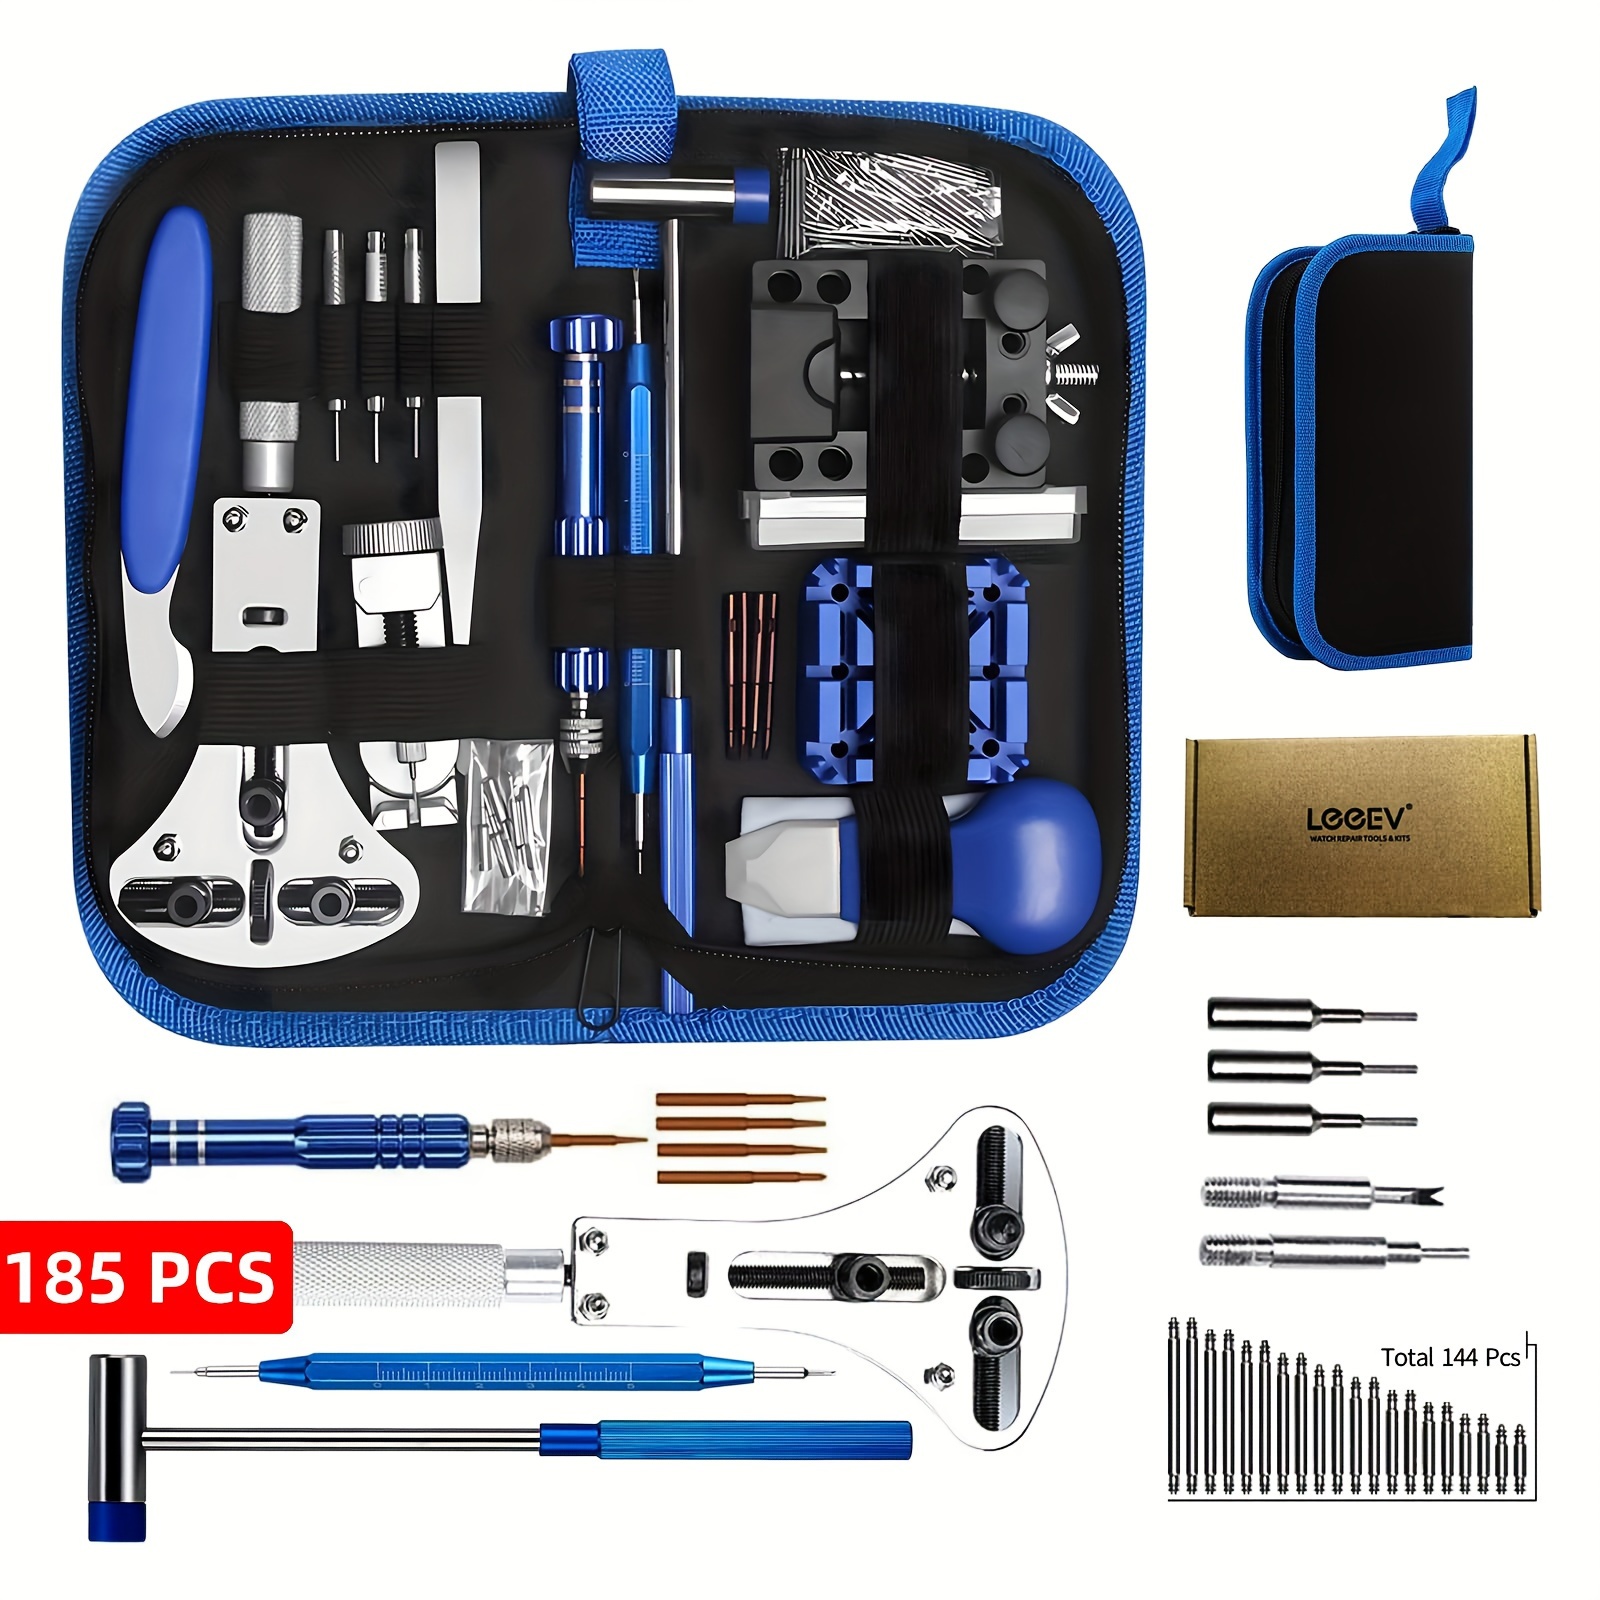 

185 Pcs Watch Repair Kit With Battery Replacement Tool, Band Link Removal And Resizing, Case Opener Spring Bar Tools, Wrench Back Remover, And Watch Cleaning Kit - Easy Carry Tool Bag Included